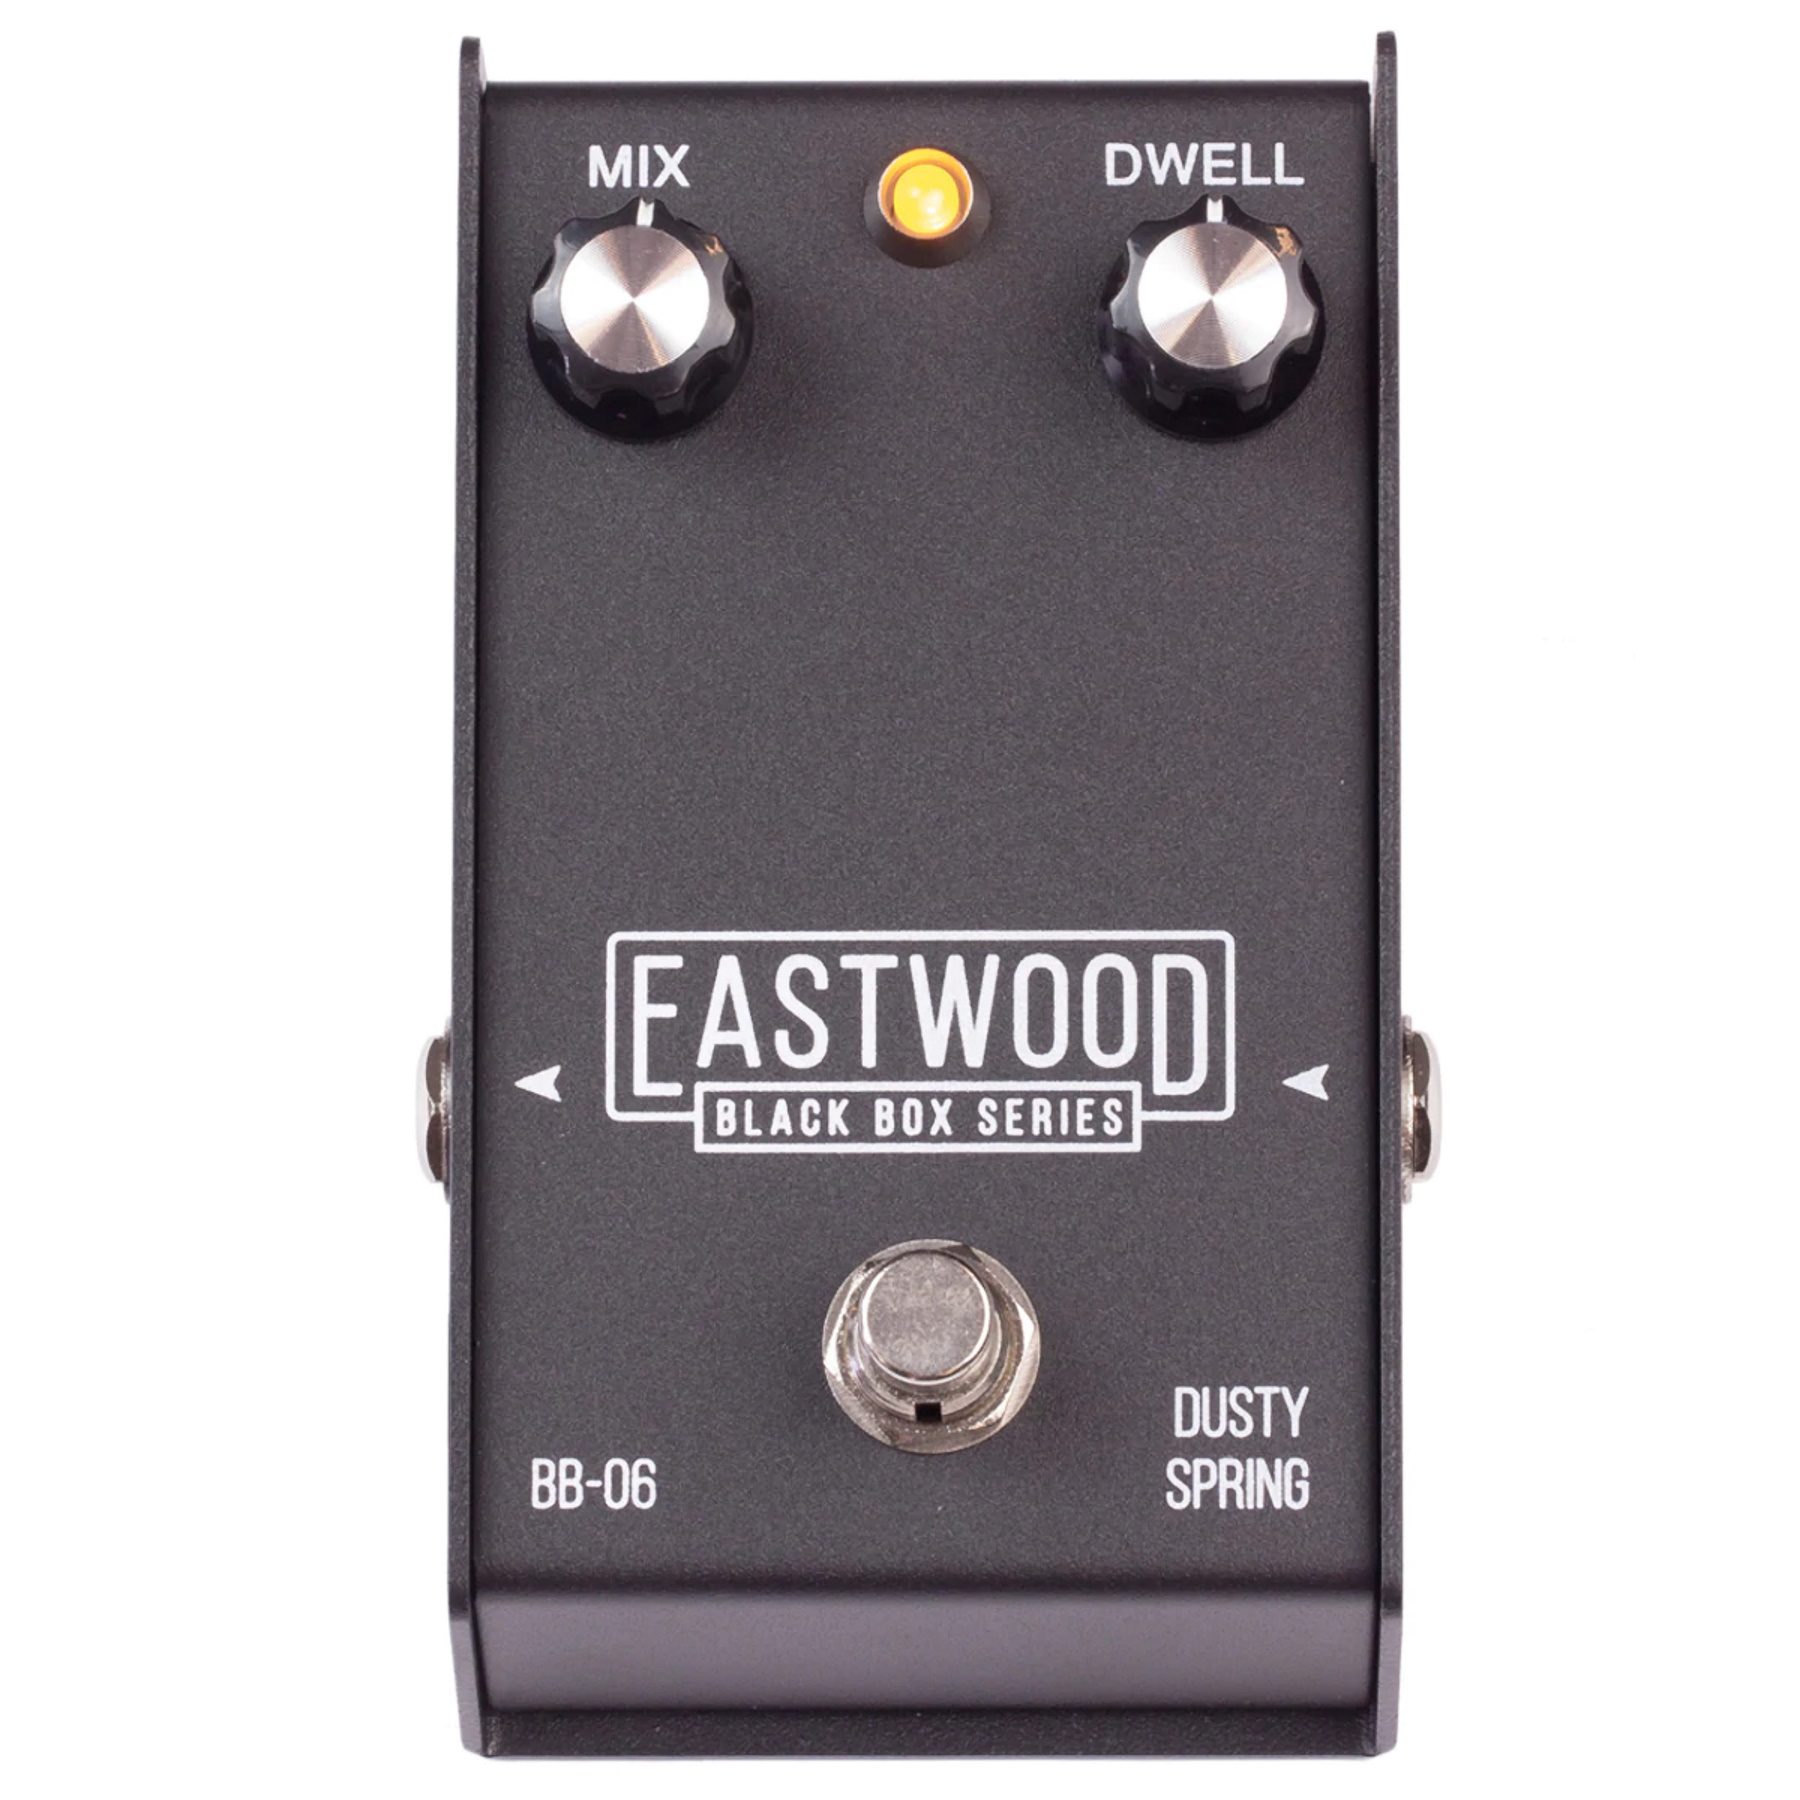 Eastwood BB-06 DUSTY SPRING Reverb Pedal